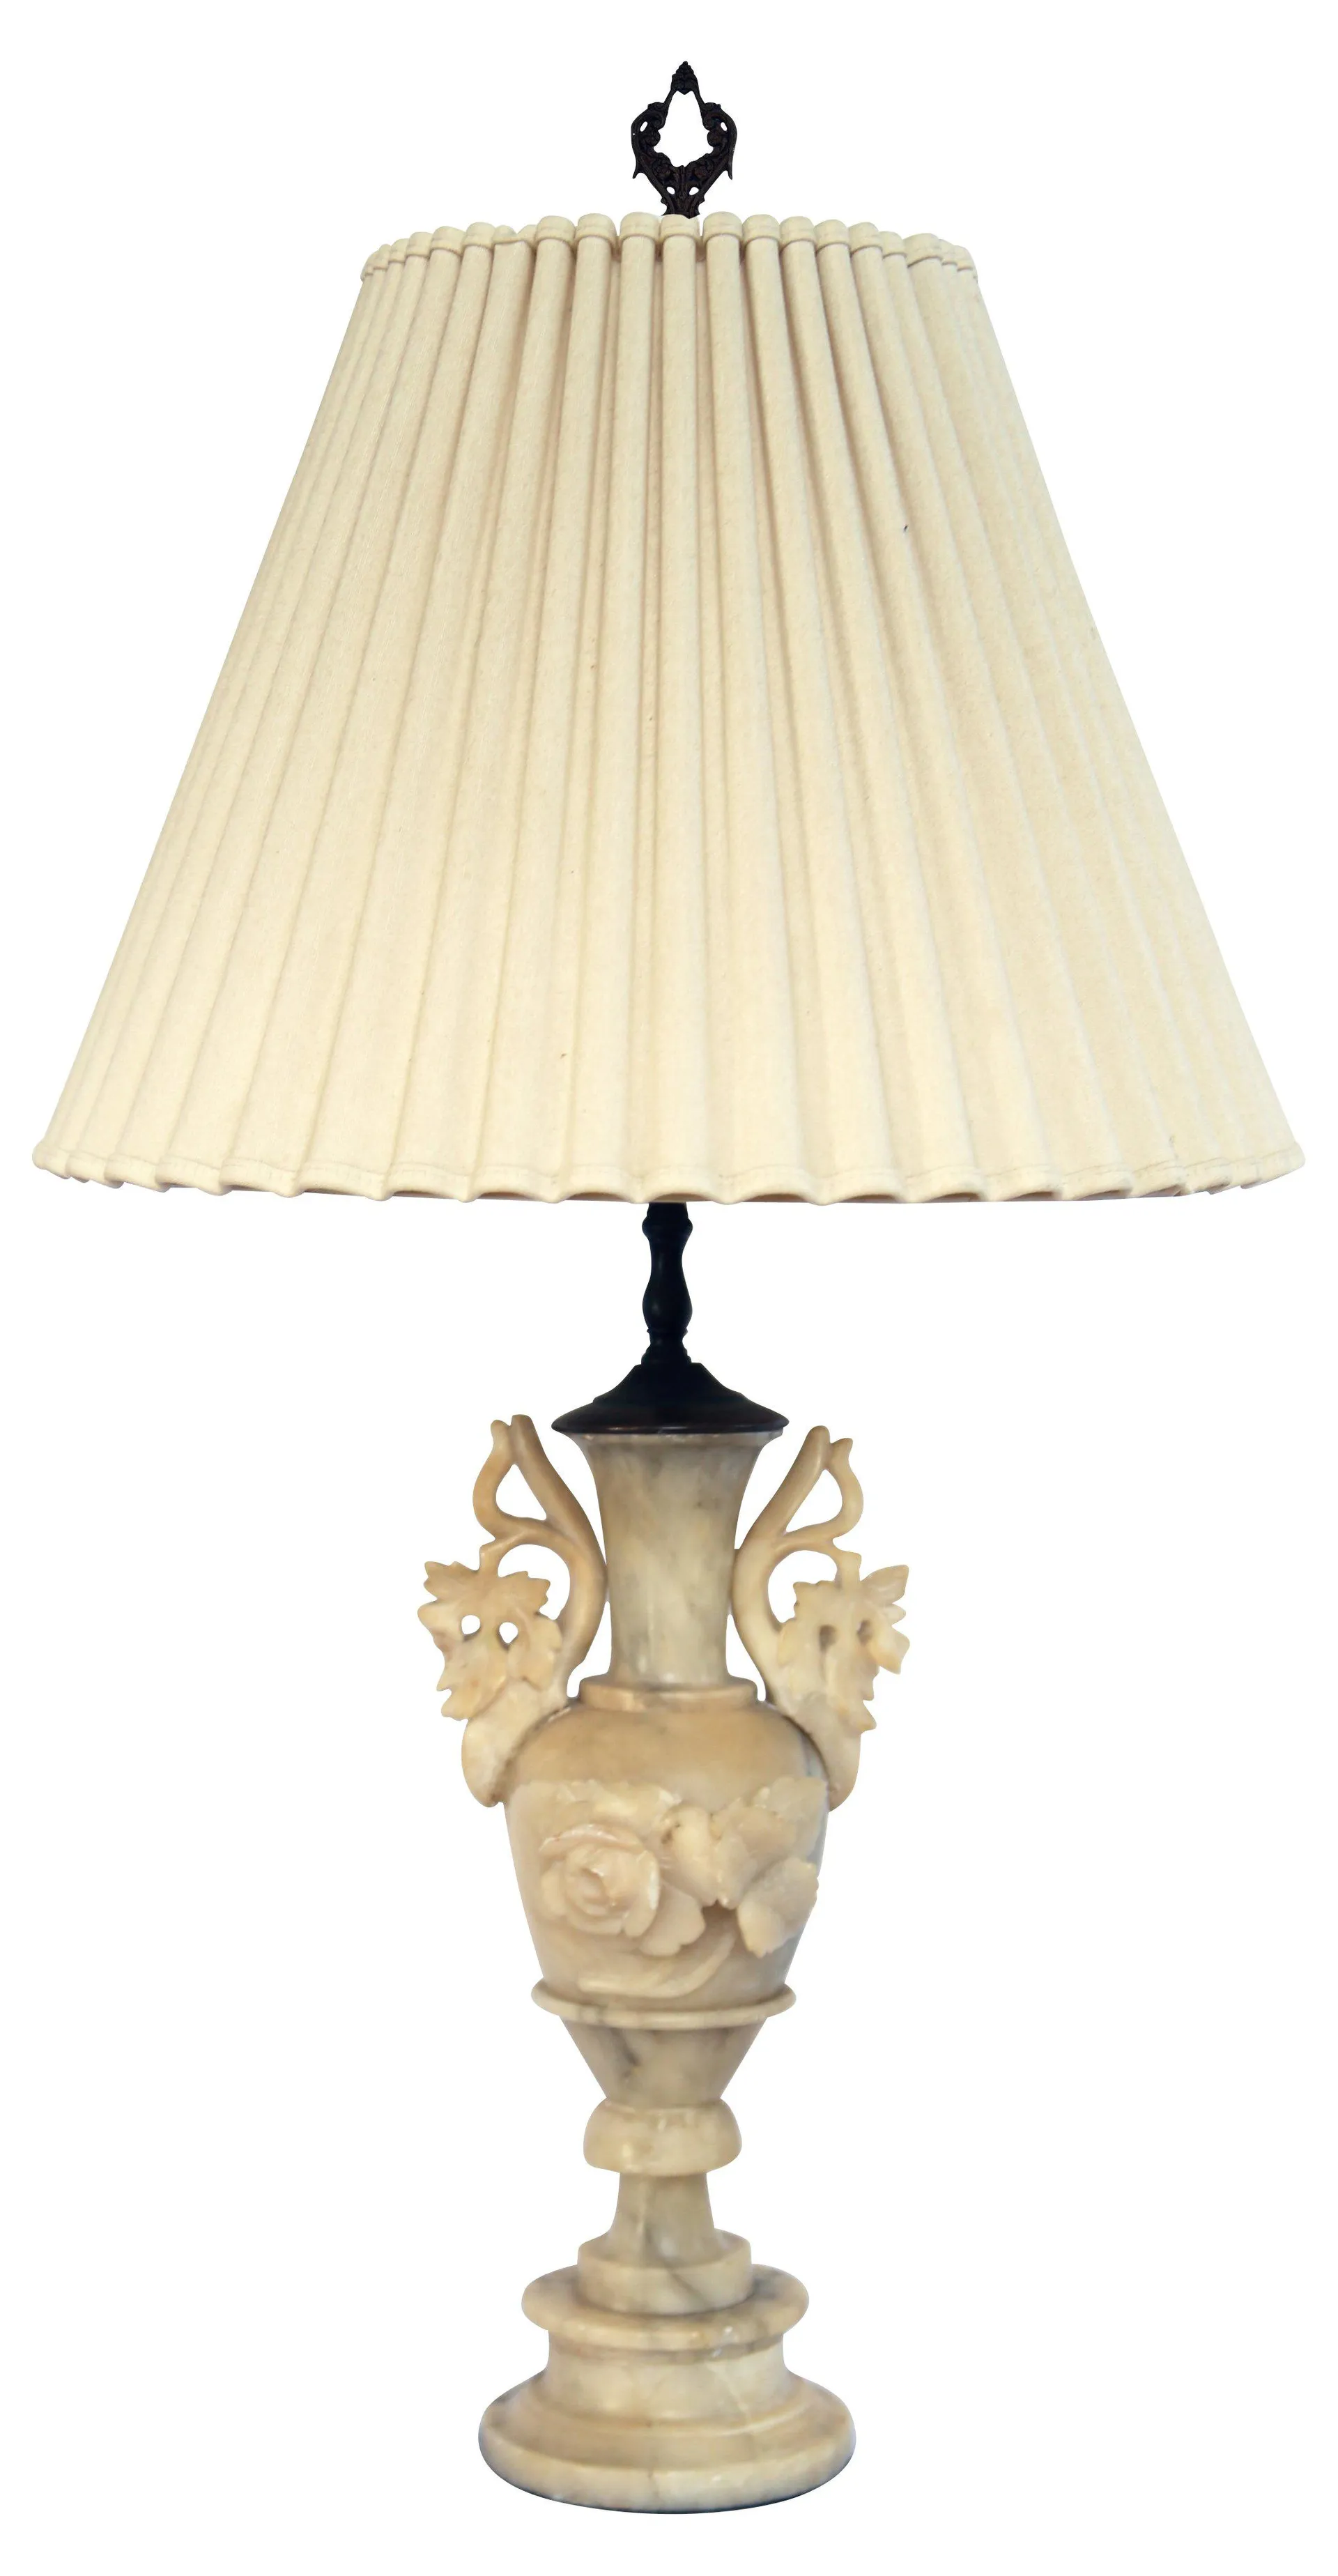 Hand-Carved Soapstone Urn Lamp